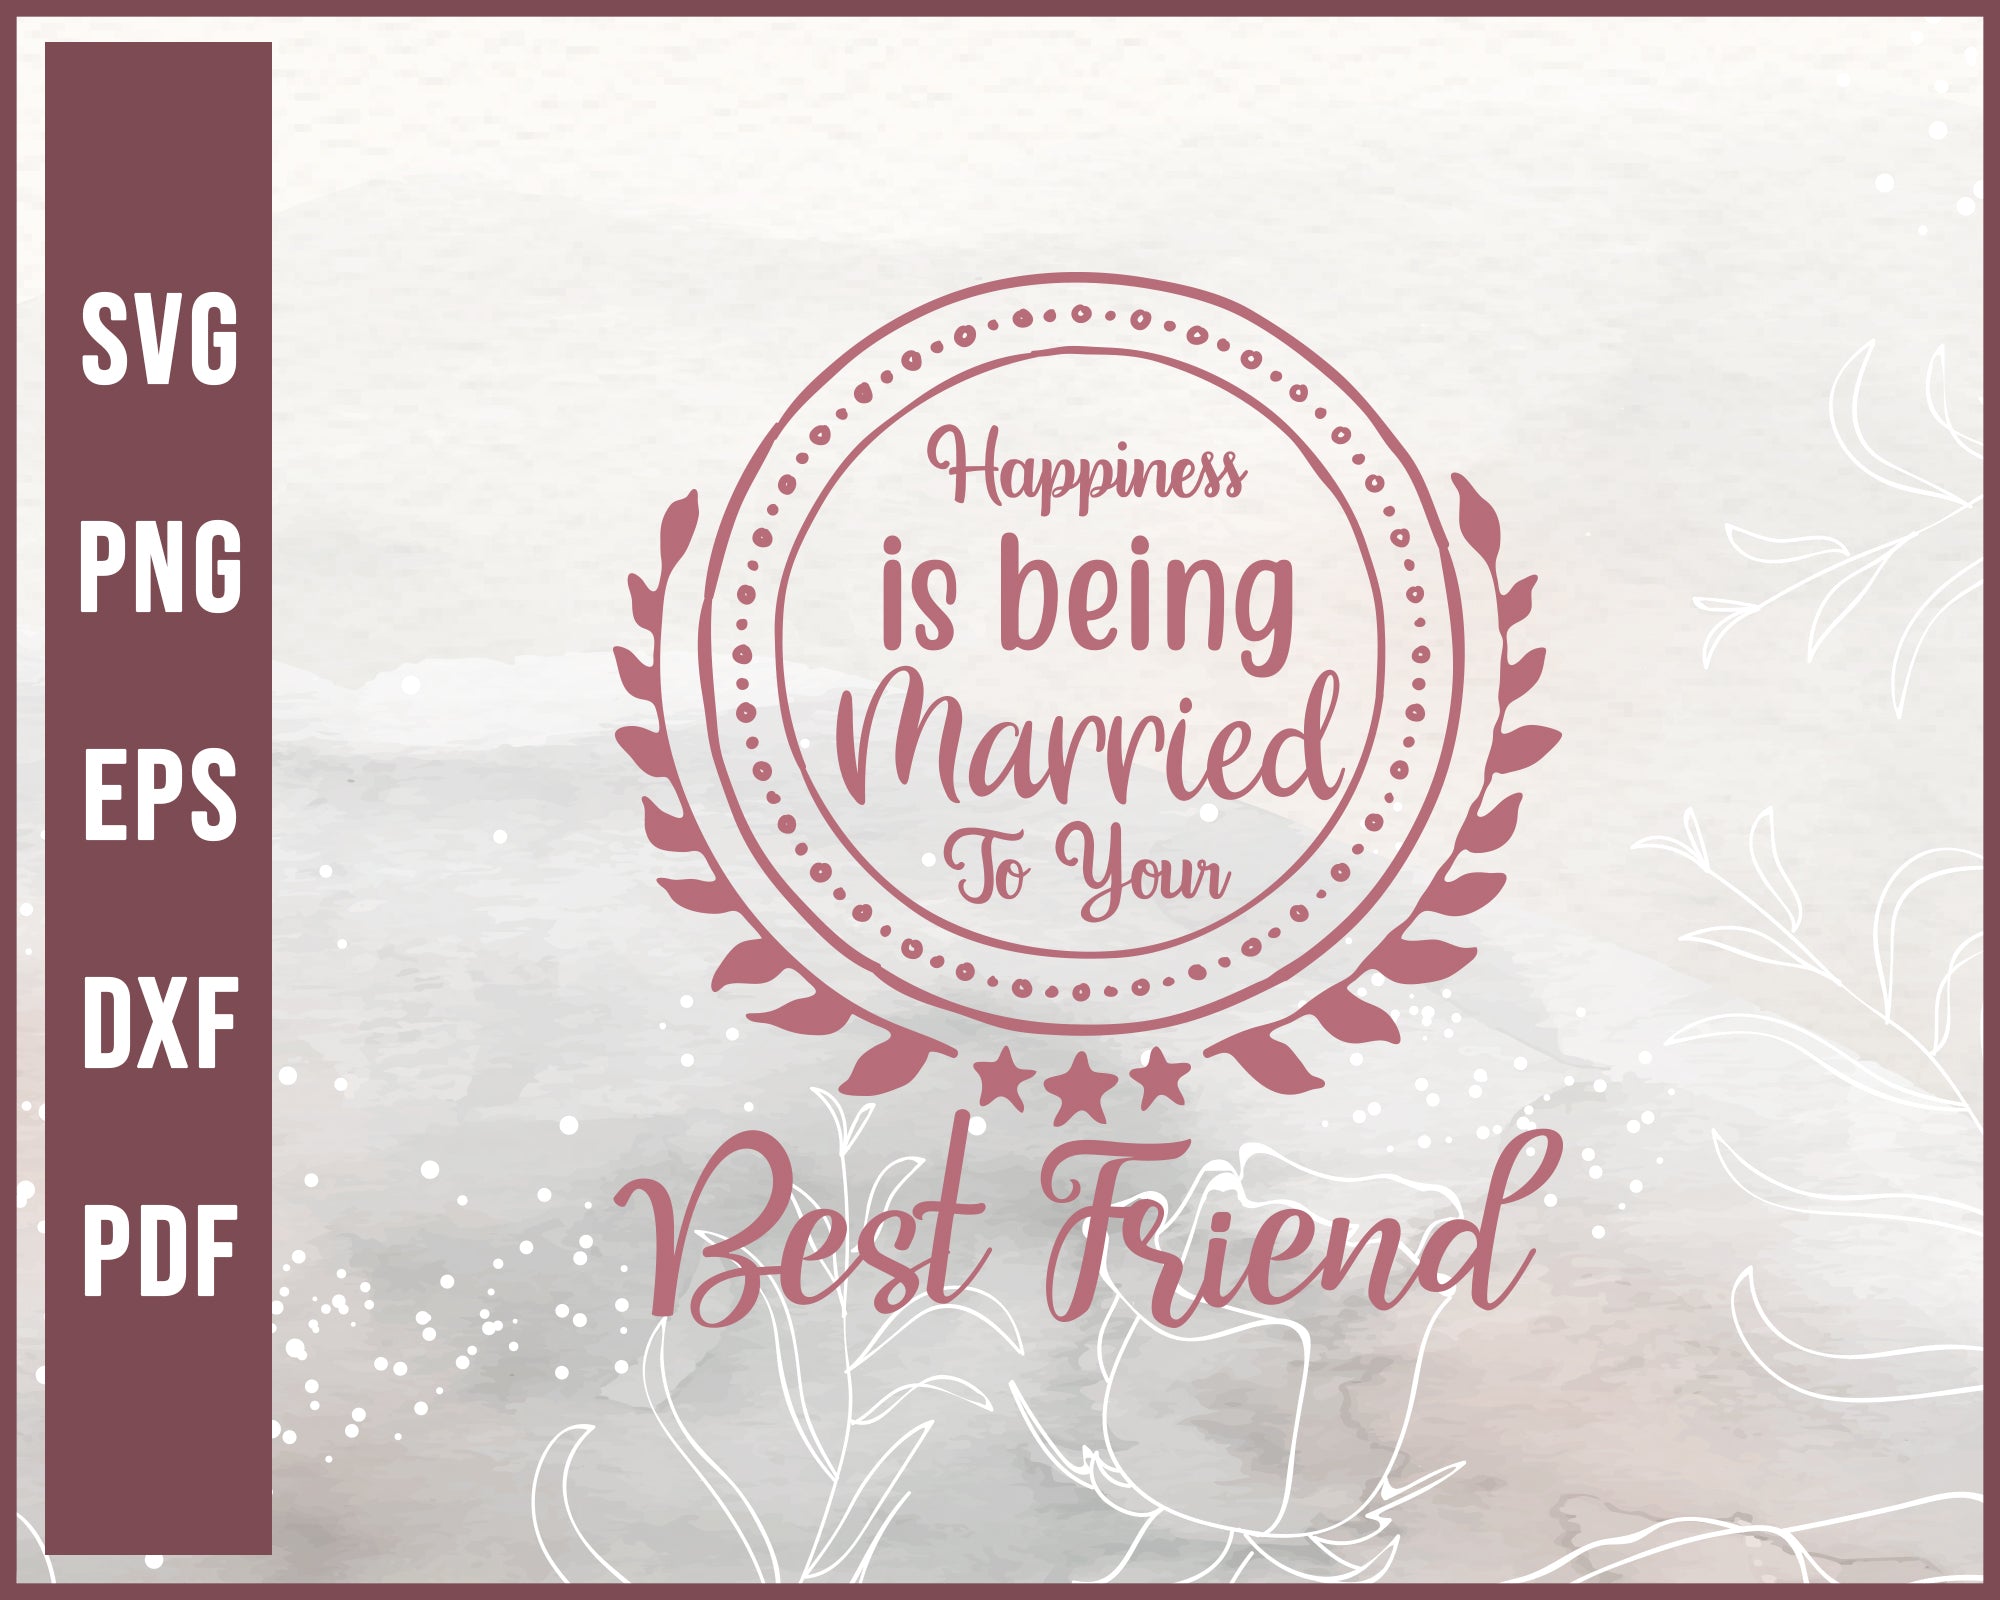 Happiness is being married to your best friend svg Designs For Cricut Silhouette And eps png Printable Files